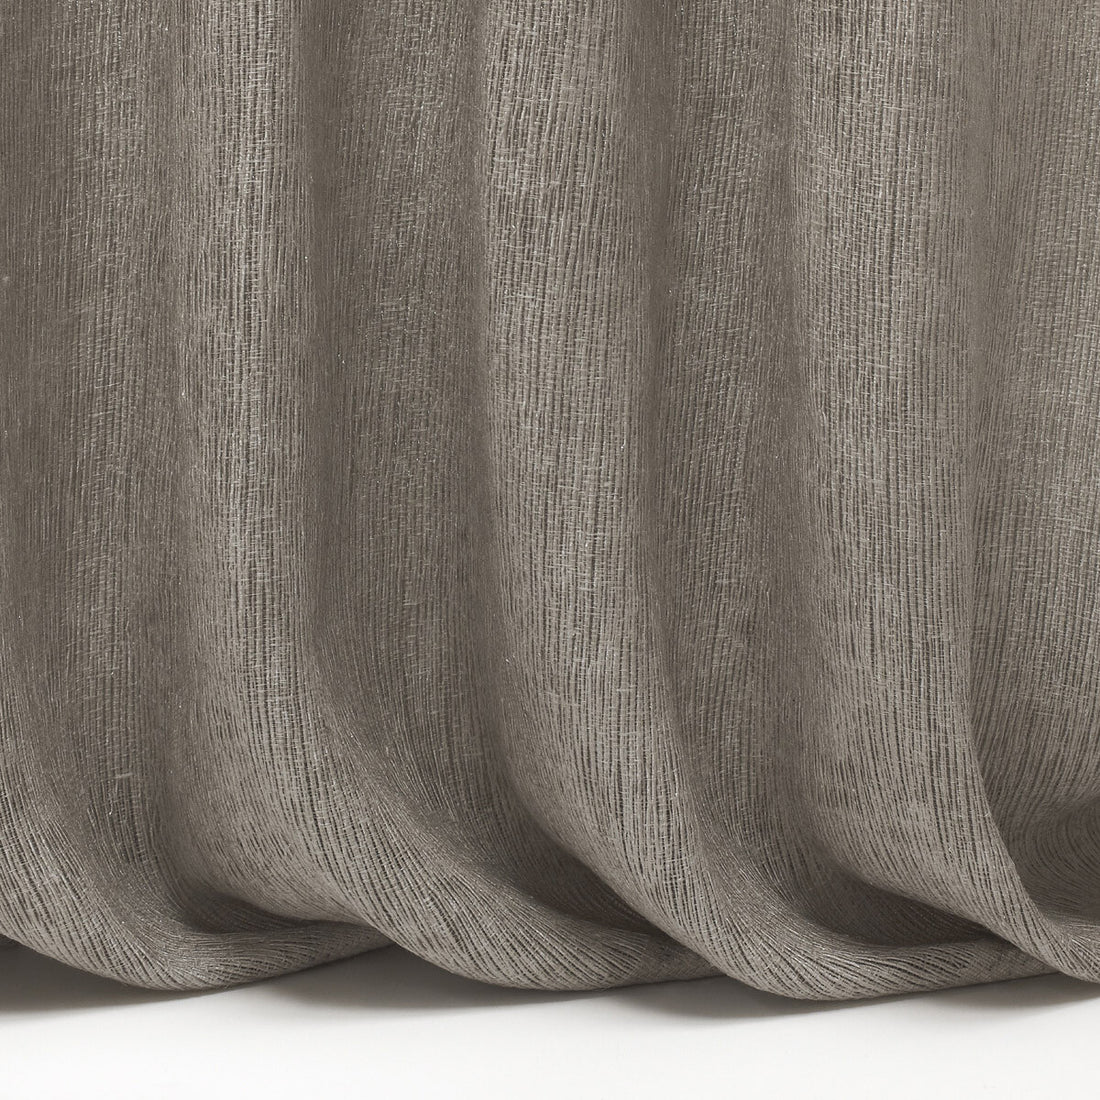 Namaste fabric in 6 color - pattern LZ-30334.06.0 - by Kravet Design in the Lizzo collection